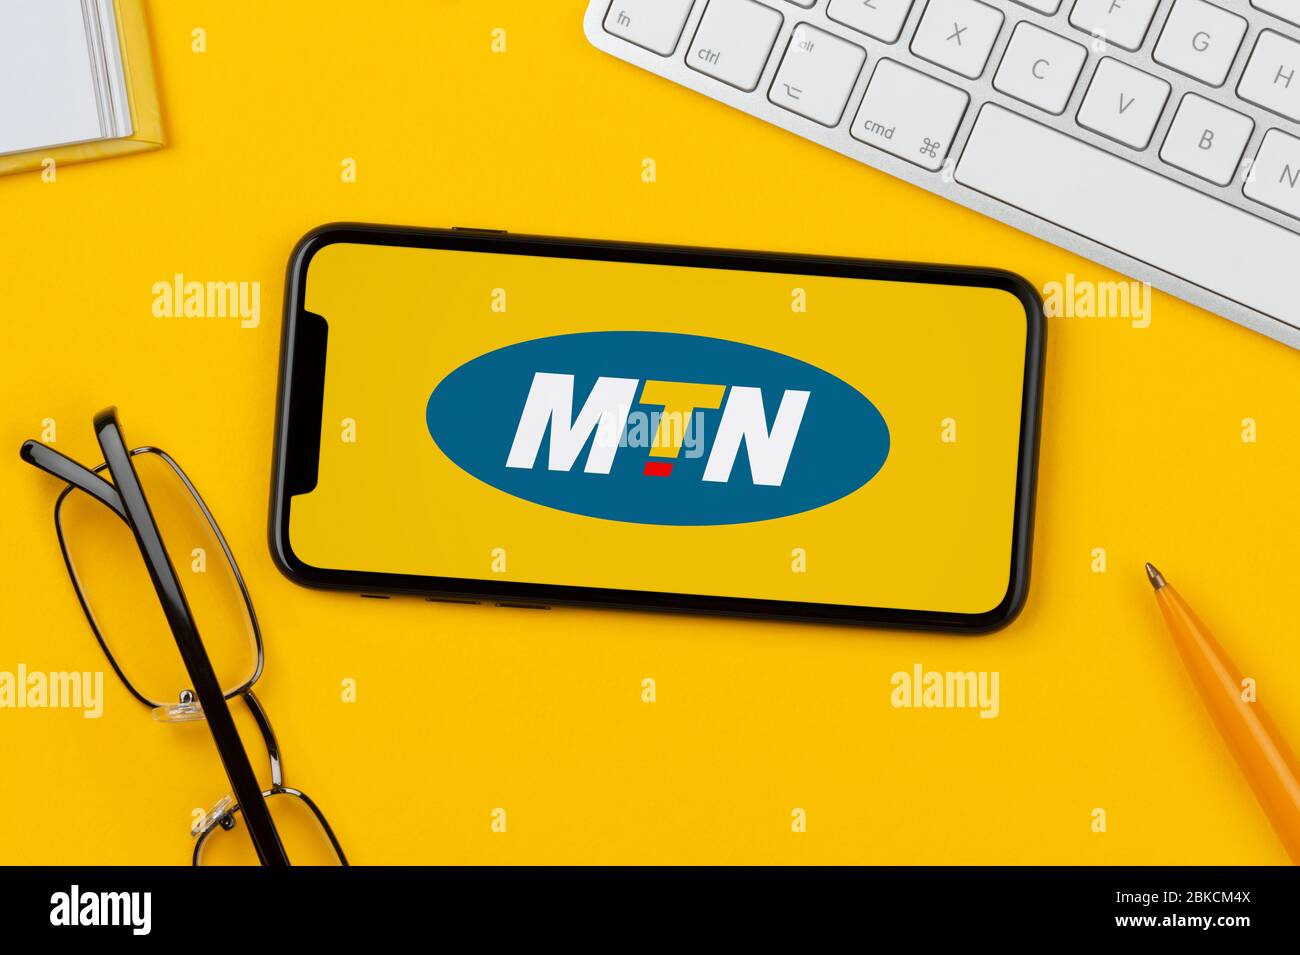 A smartphone showing the MTN logo rests on a yellow background along with a keyboard, glasses, pen and book (Editorial use only). Stock Photo